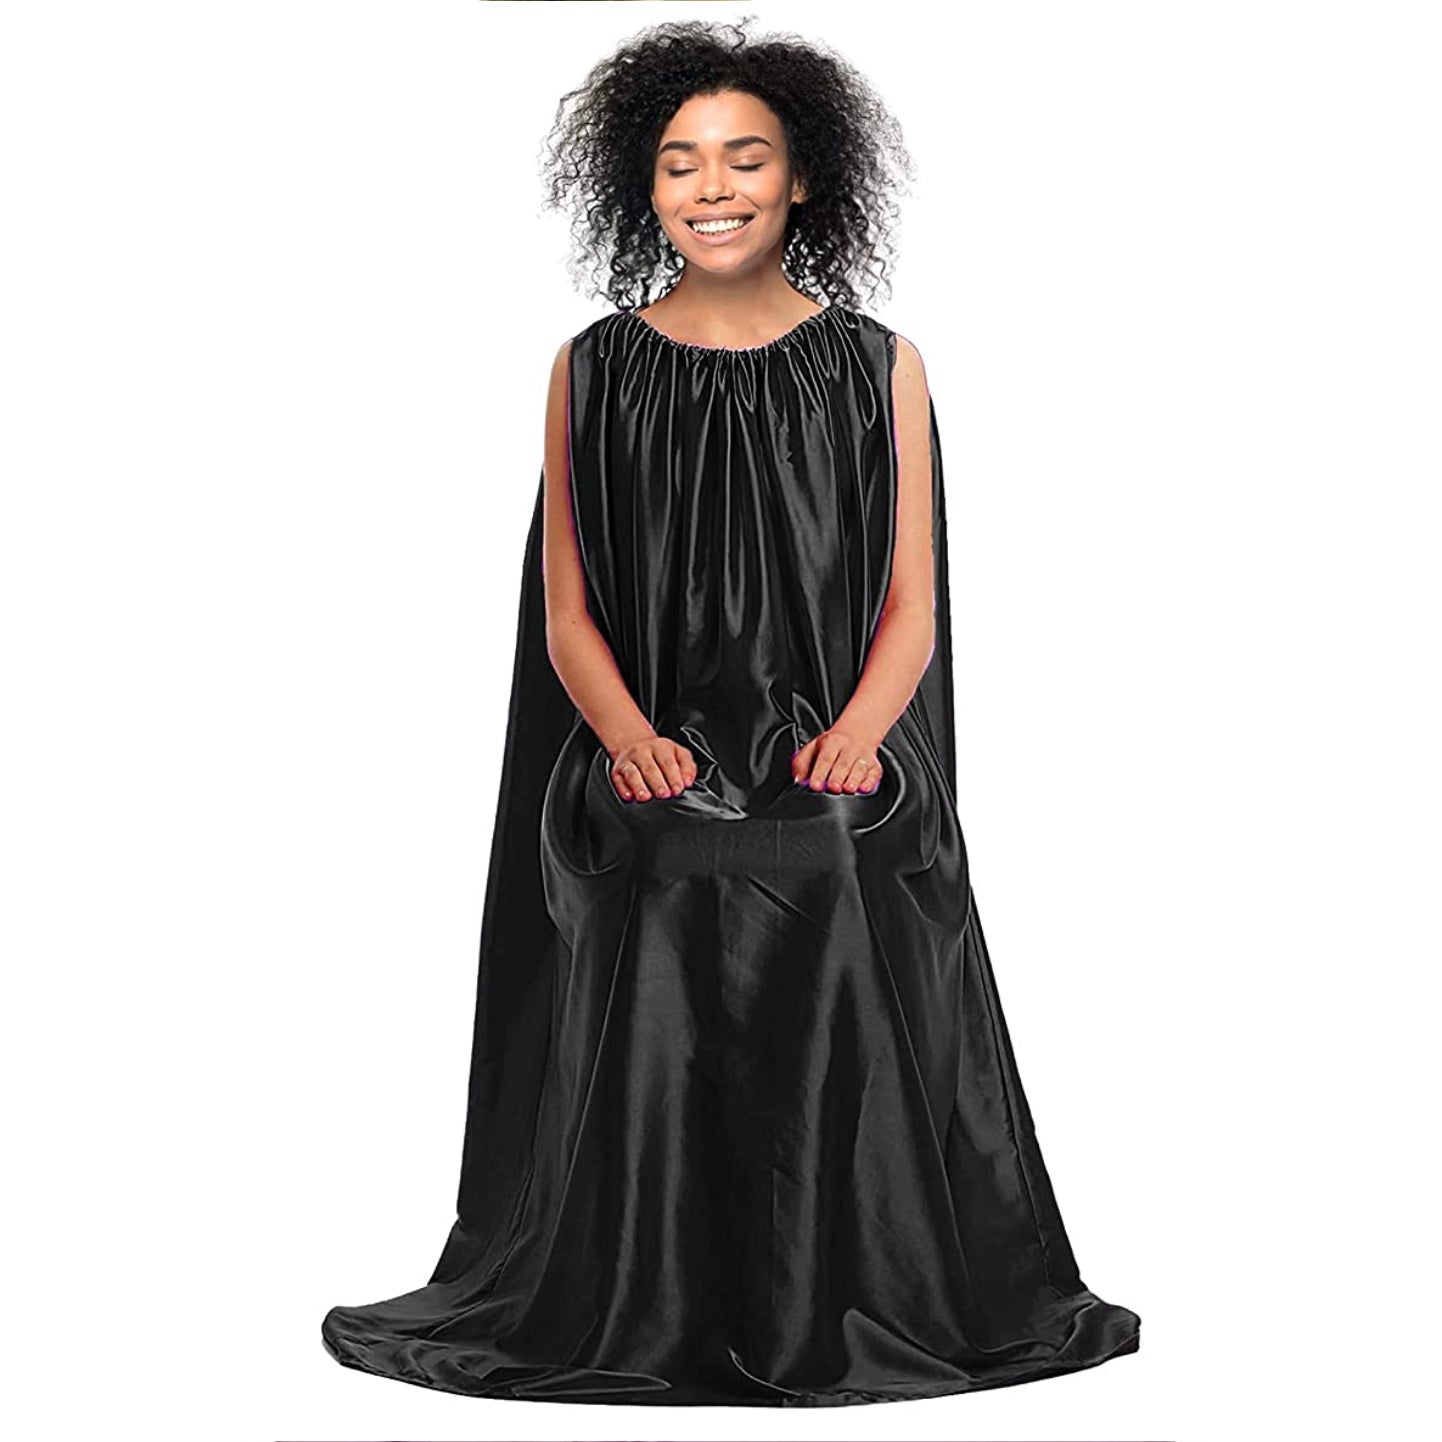 Royal Yoni Steam Gown | Bath Robe | Full Body Covering | Soft and Sleek Fabric | NUDE U - SH Salons